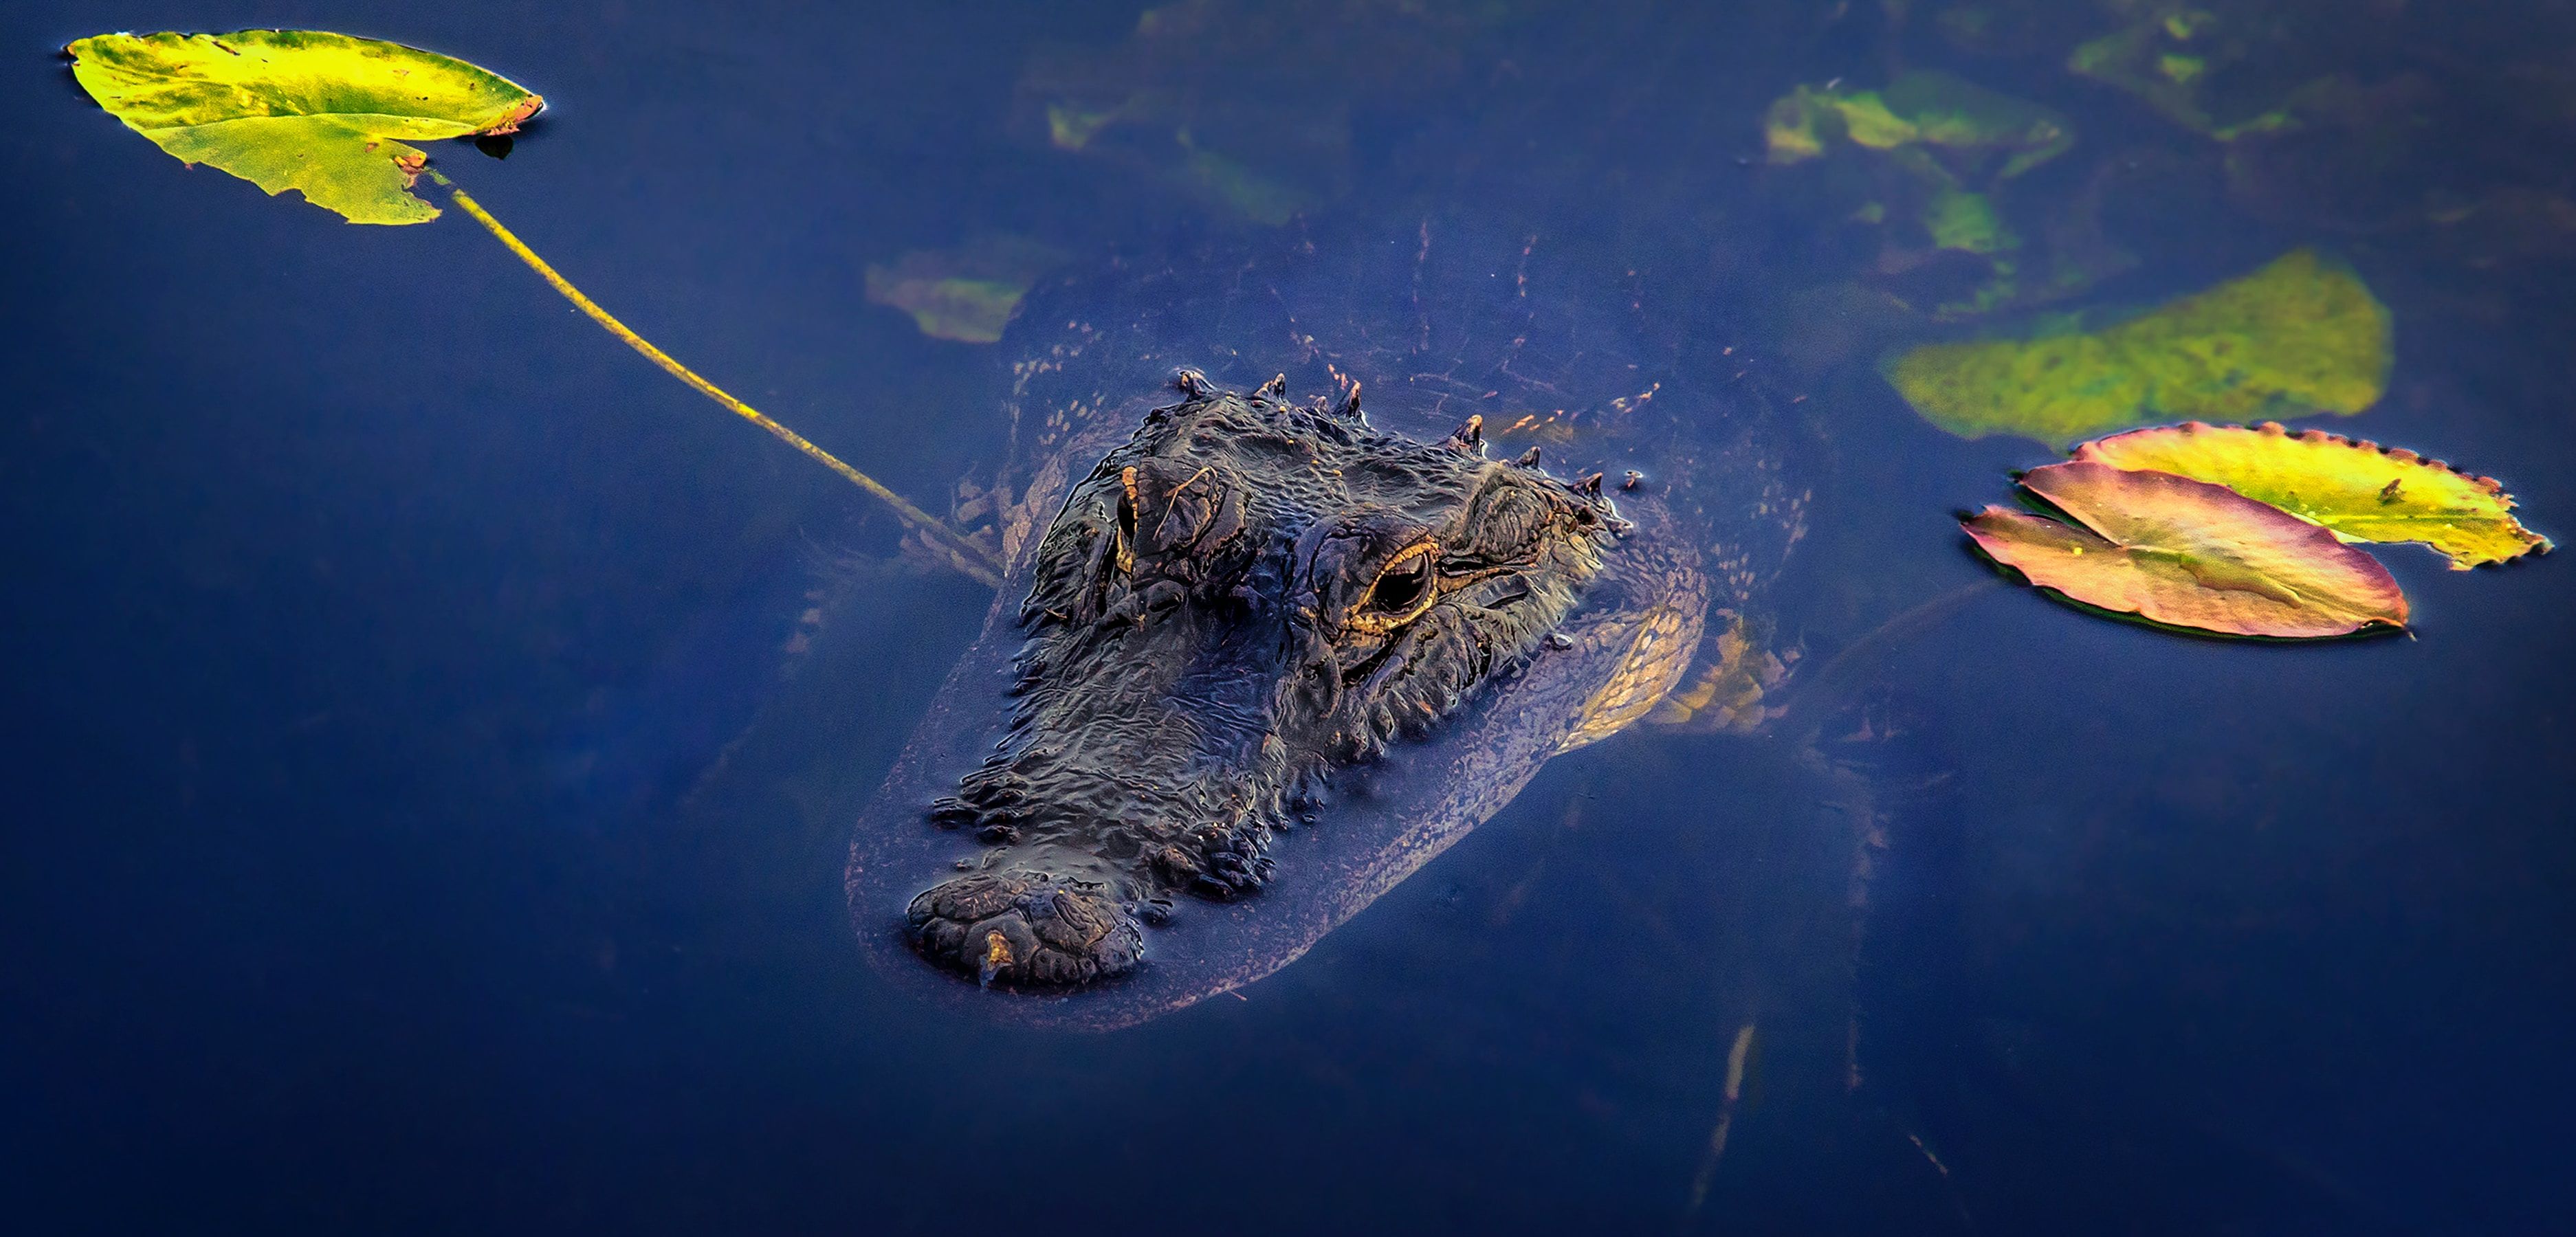 Top of an alligator's head emerging from water 